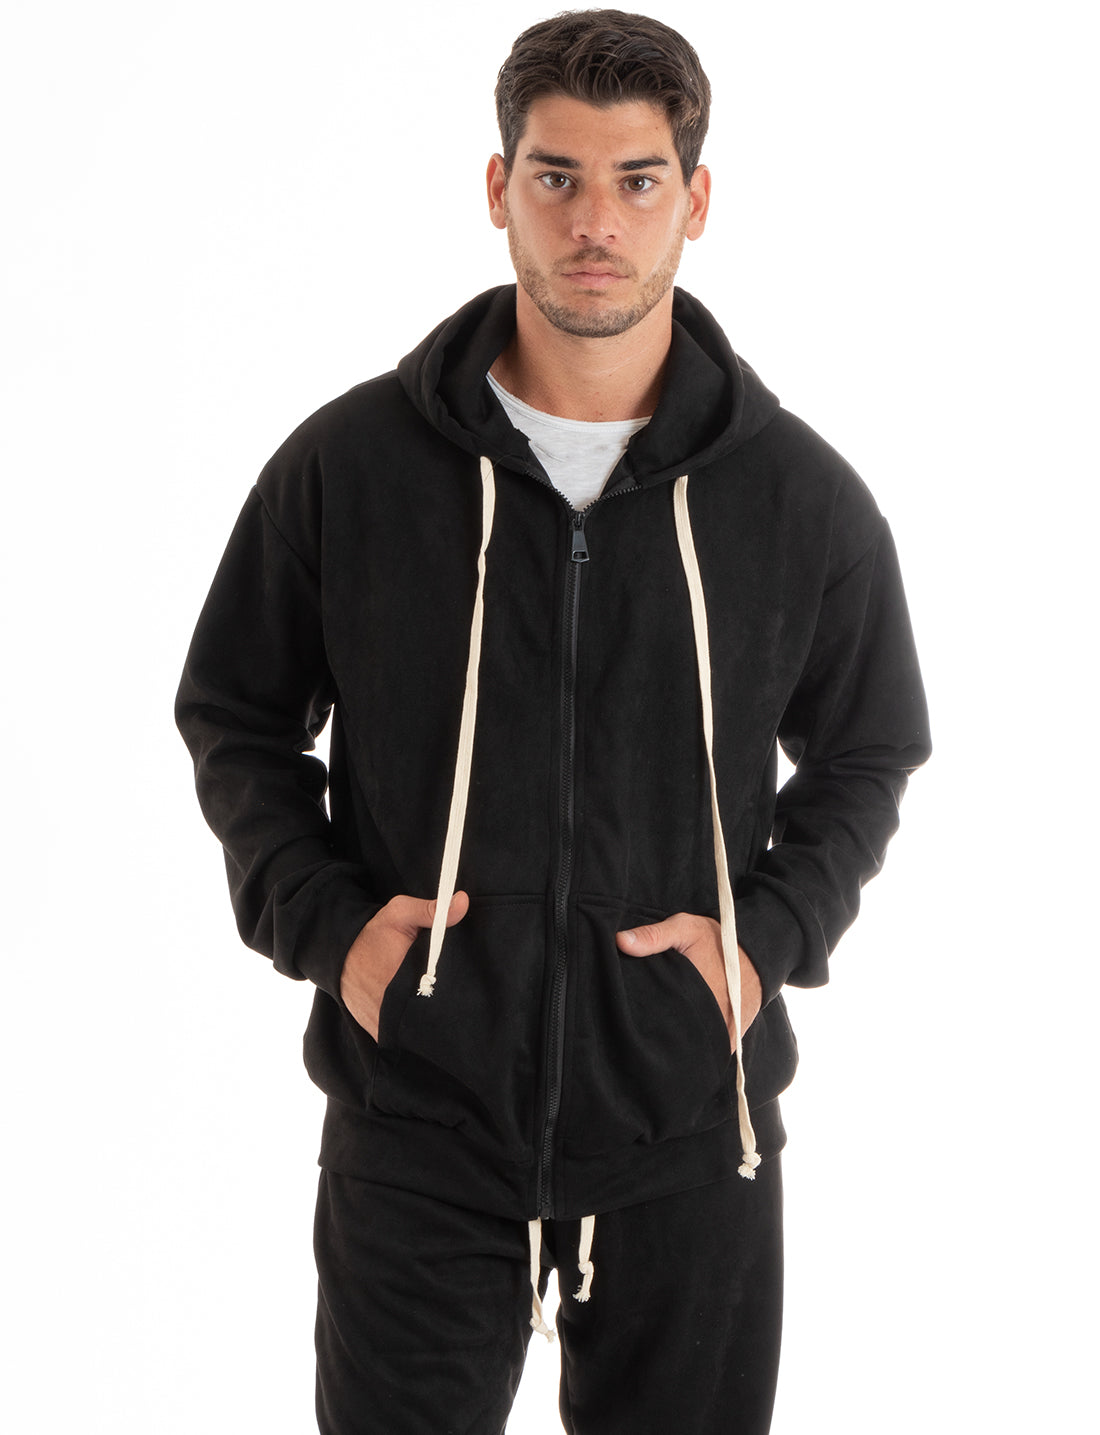 Men's Tracksuit Set with Hood and Zip Trousers with Drawstring Waist in Black Eco Suede GIOSAL-OU2396A